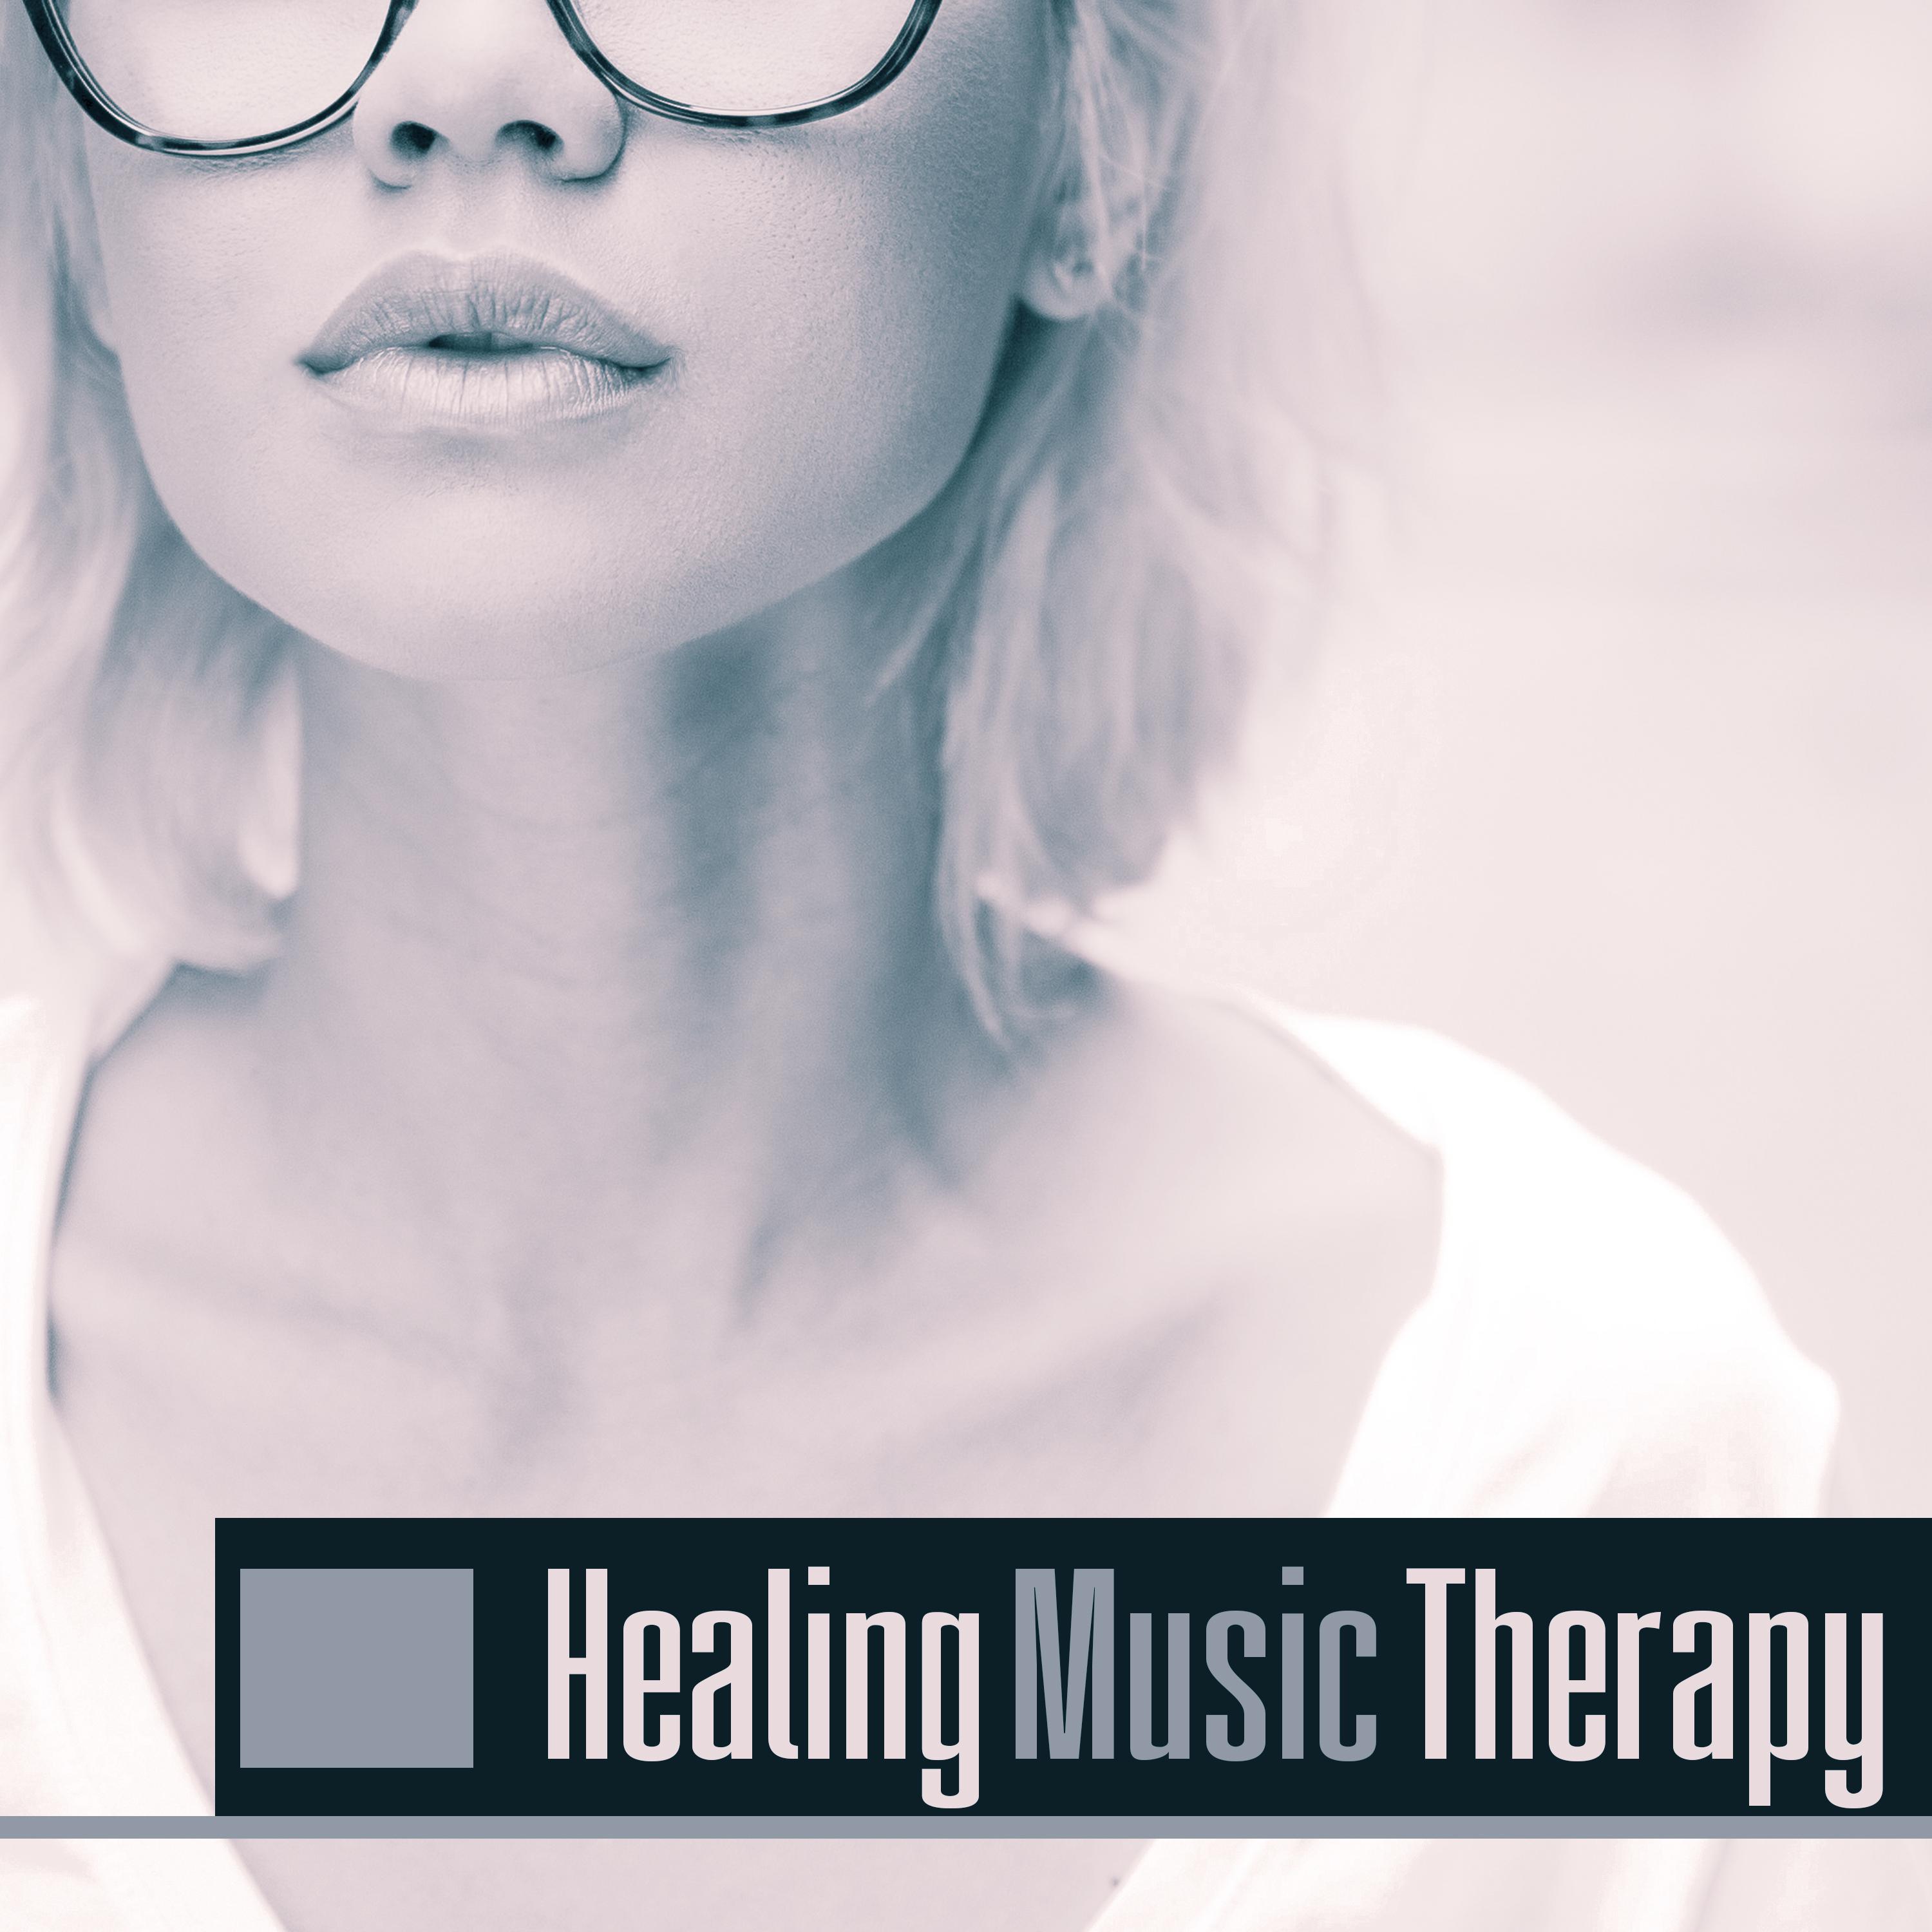 Healing Music Therapy – Peaceful Sounds of Nature, Pure Relaxation, Rest & Stress Relief, New Age